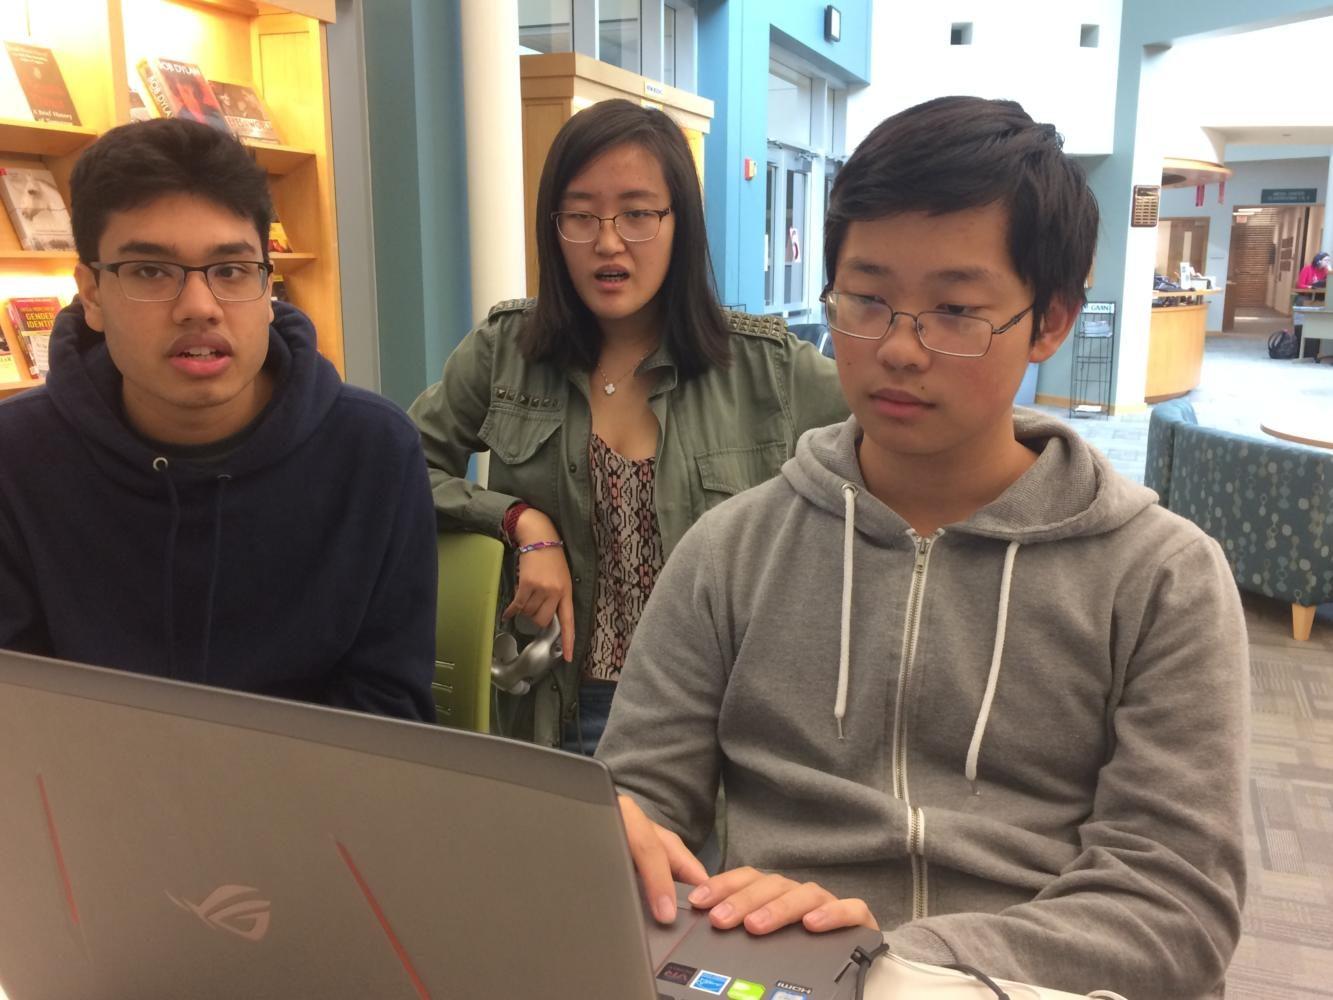 Seniors Aakash Roy, Catherine Qing
 and Kevin Chen (left to right) use Canvas to complete their homework during SRT. Chen said although more could be done to improve the integration of Canvas, he prefers it over previous platorms, such as Edmodo and Moodle.
